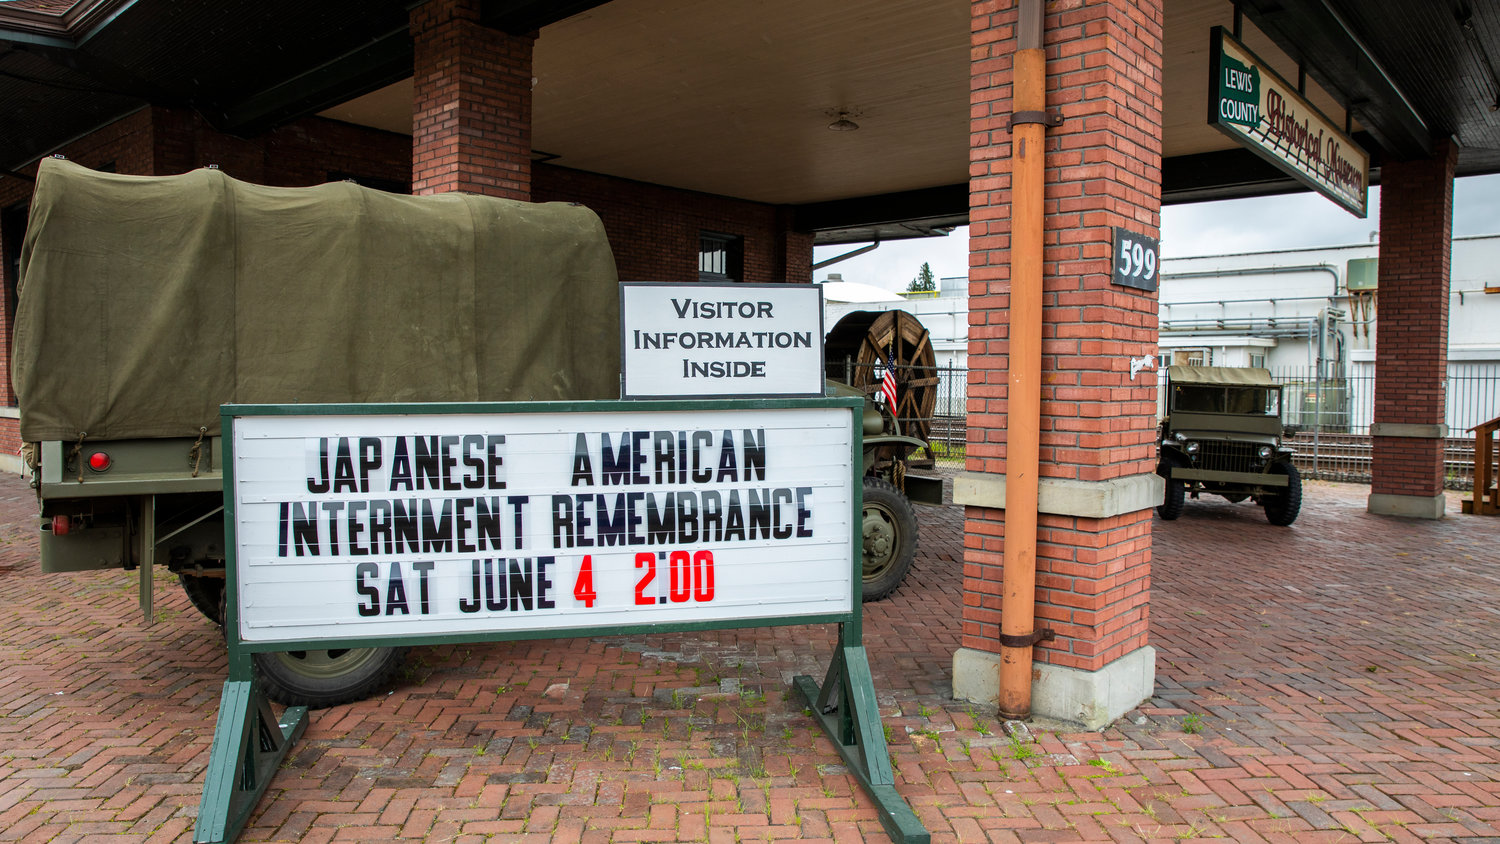 Signs sit on display next to vintage military vehicles at the Lewis County Historical Museum in Chehalis during a Japanese American Internment Remembrance.